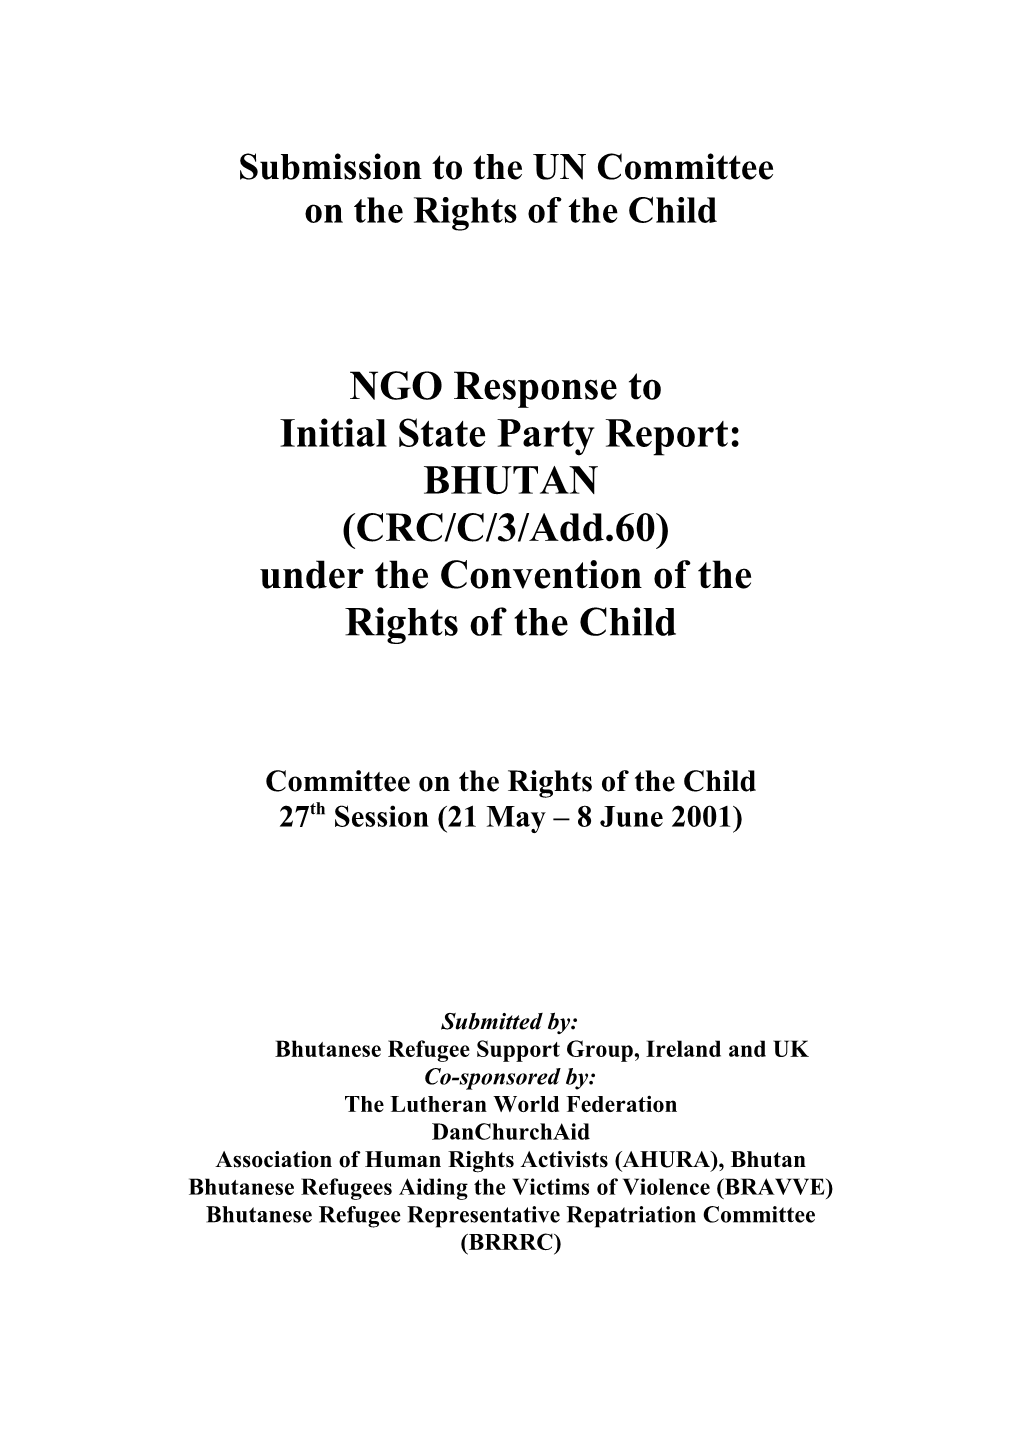 Article 7 of the CRC Is Addressed in the Section Civil Rights and Freedoms Under the Heading